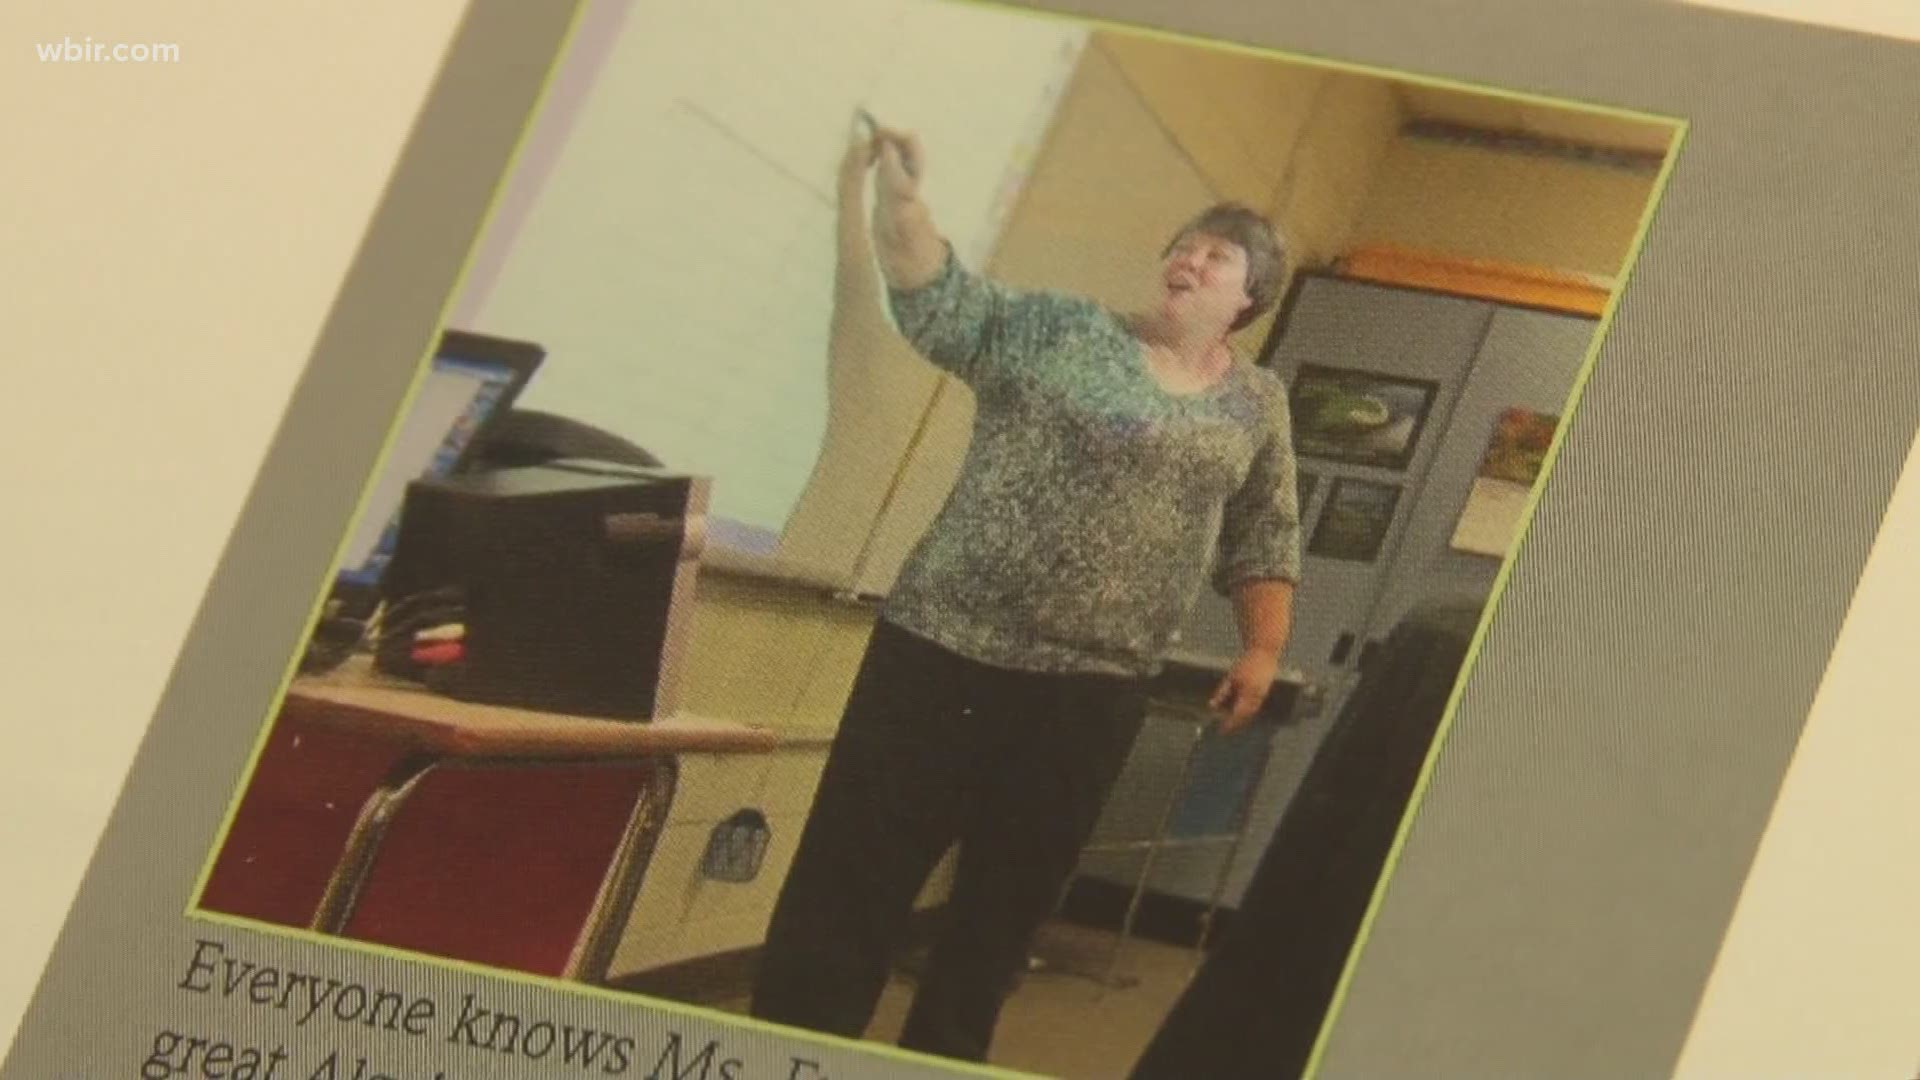 Retired teachers are playing a key role in reducing the teacher shortage in East Tennessee. Many are logging in to help out with virtual learning workloads.